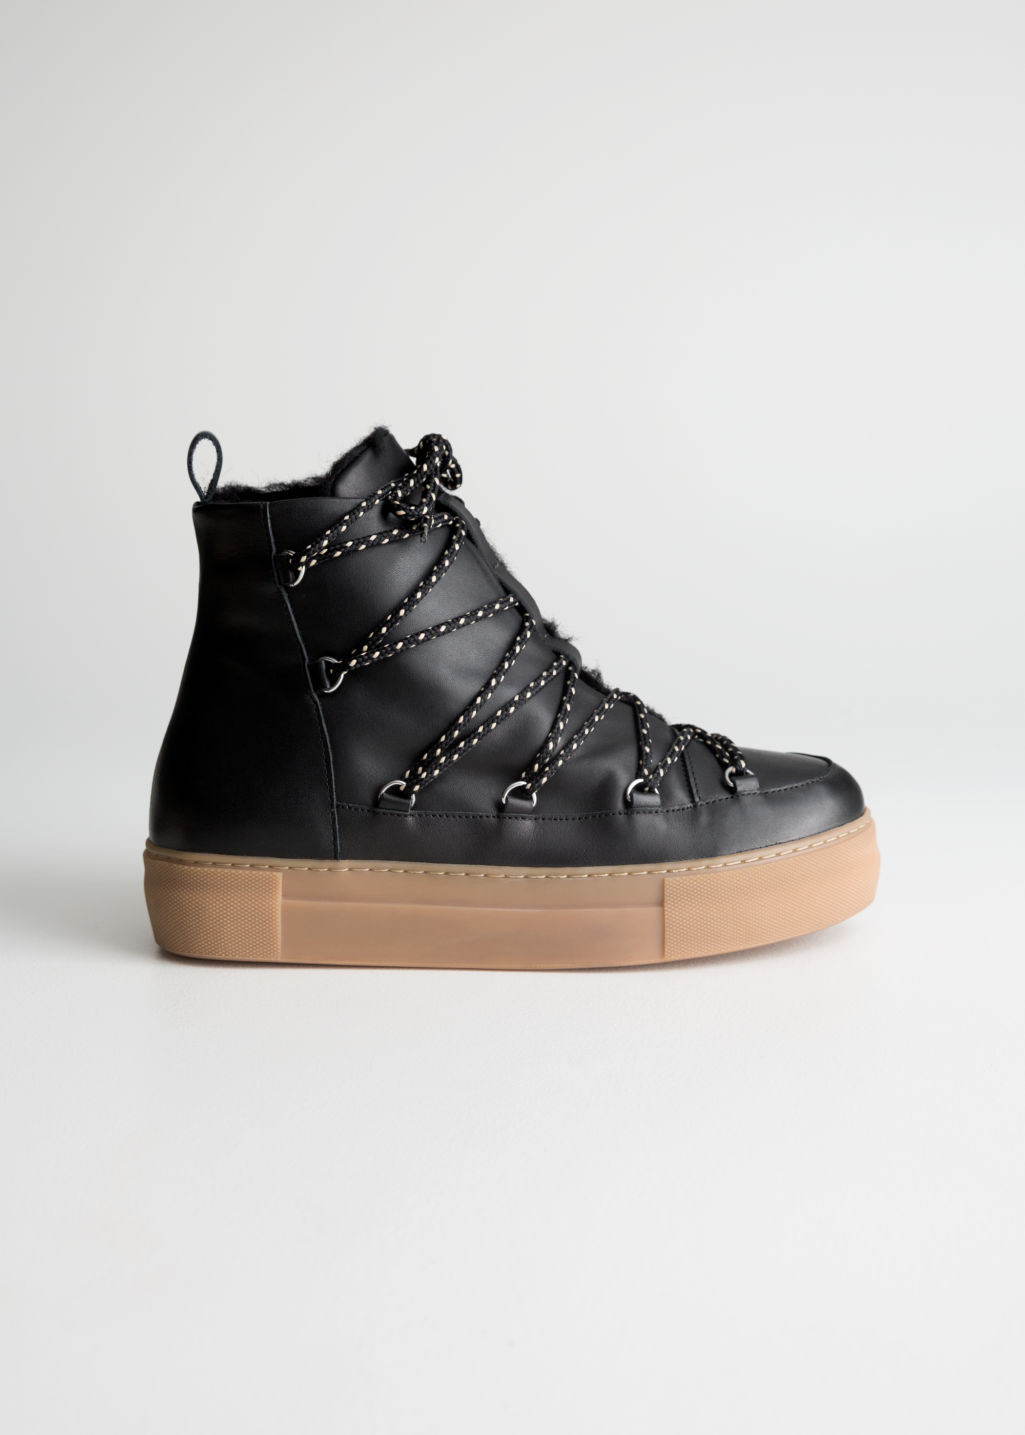 Leather Snow Boots - Black - Ankleboots - & Other Stories